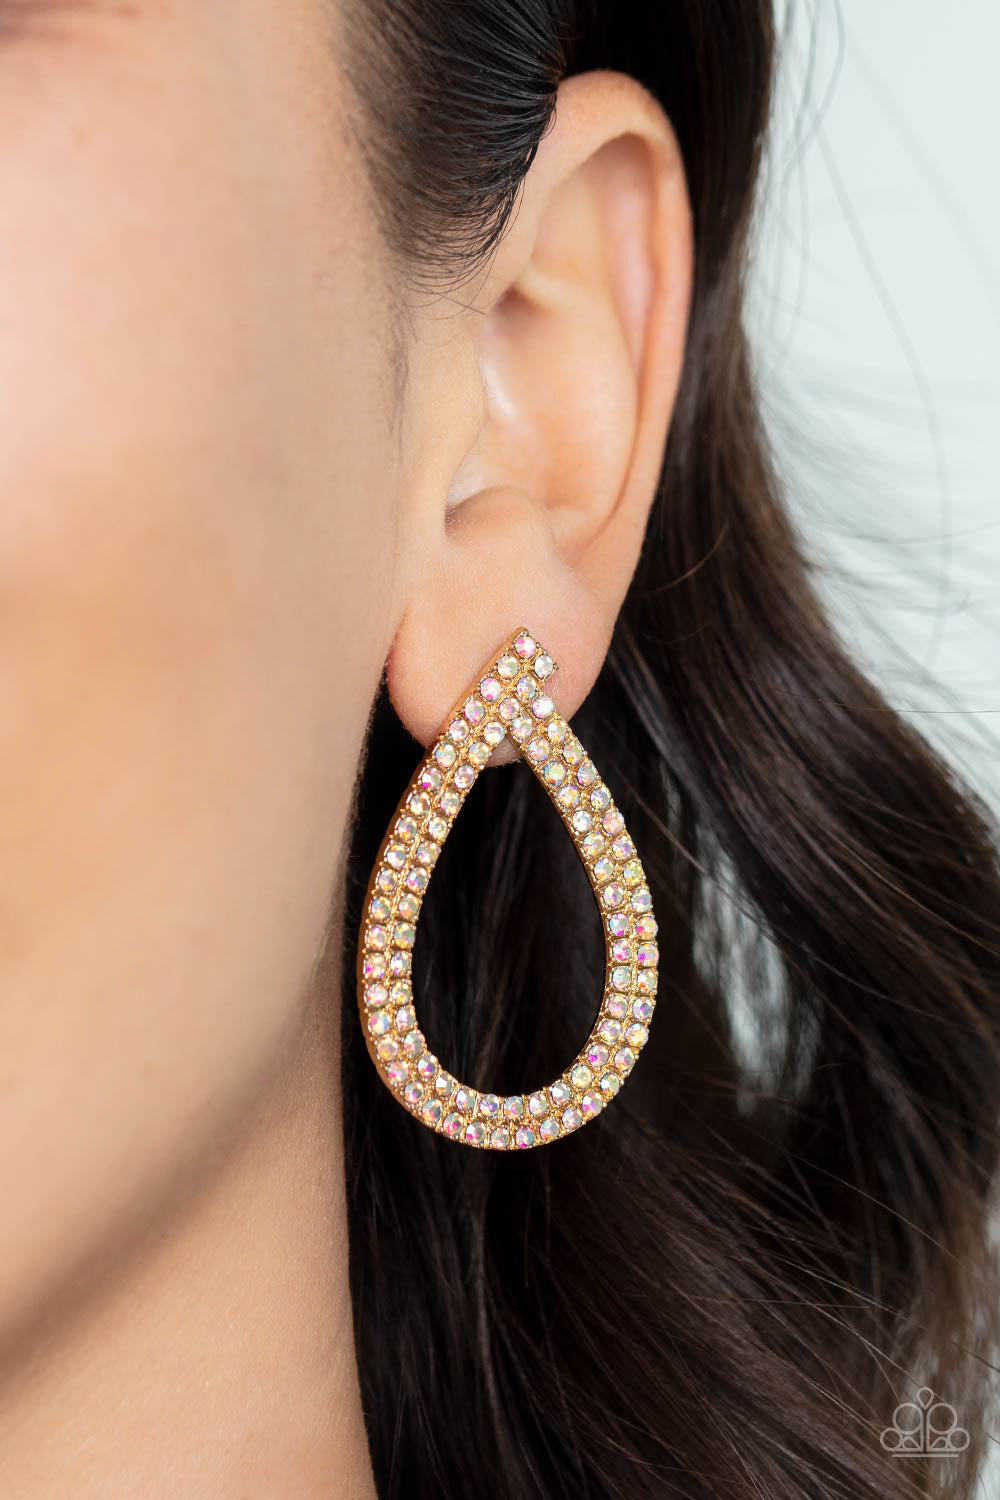 Diva Dust Gold Earring - Paparazzi Accessories  Glitzy ribbons of dainty iridescent rhinestones delicately swoop into a stellar teardrop frame, resulting in a sultry sparkle. Due to its prismatic palette, color may vary. Earring attaches to a standard post fitting.  Sold as one pair of post earrings.